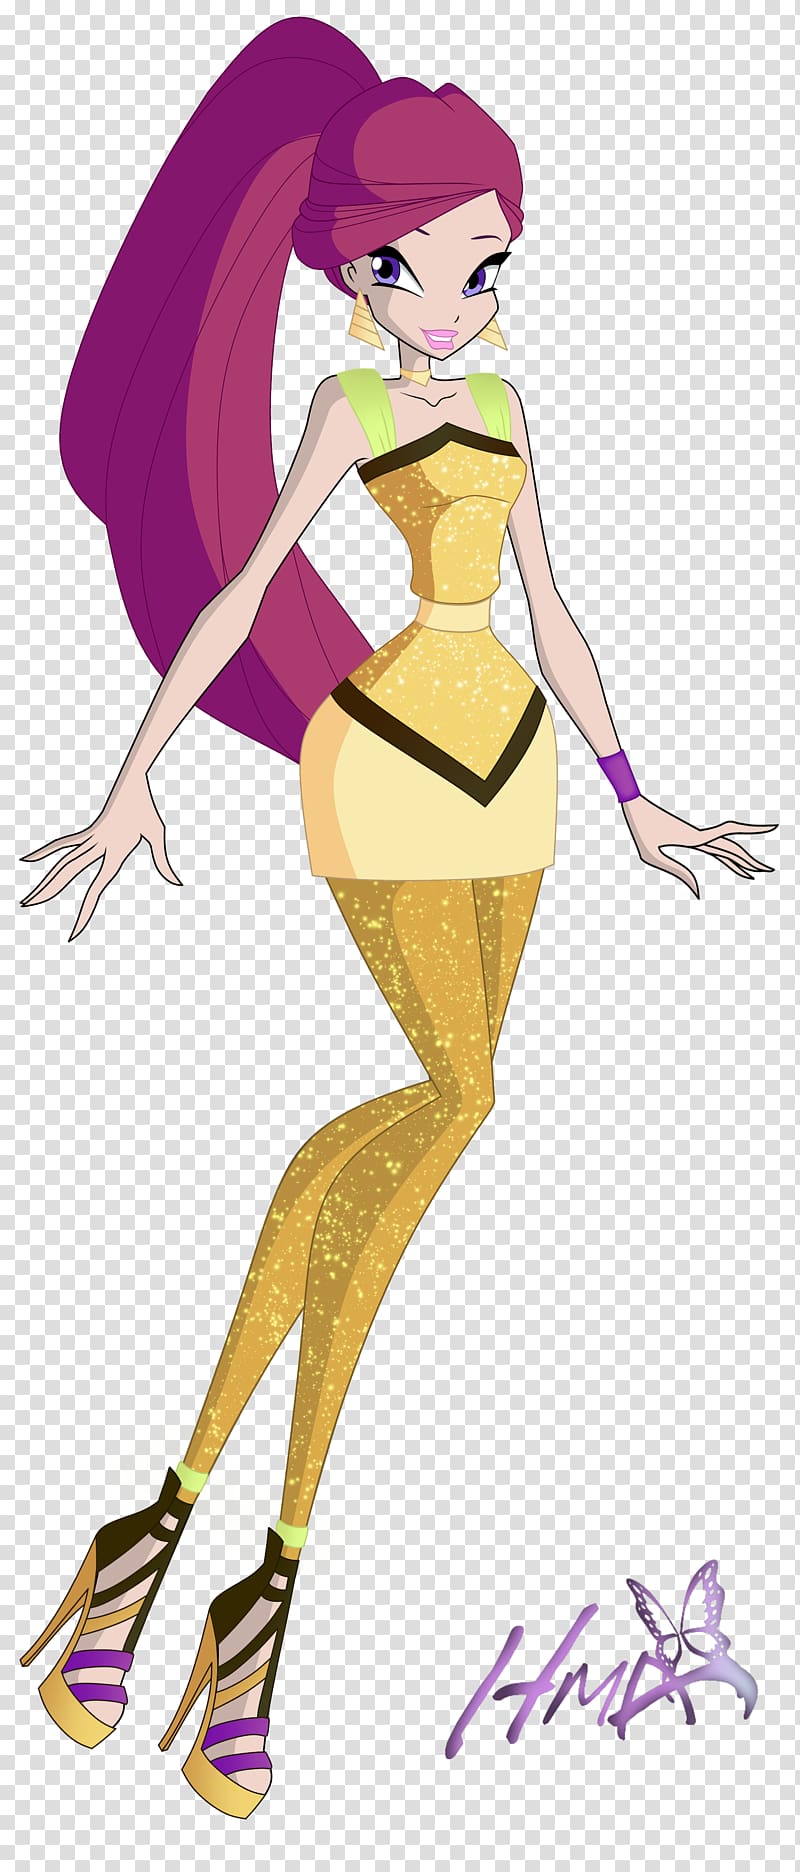 Roxy Musa Winx Club, Season 7 Animated series, Tourism In Oman transparent background PNG clipart